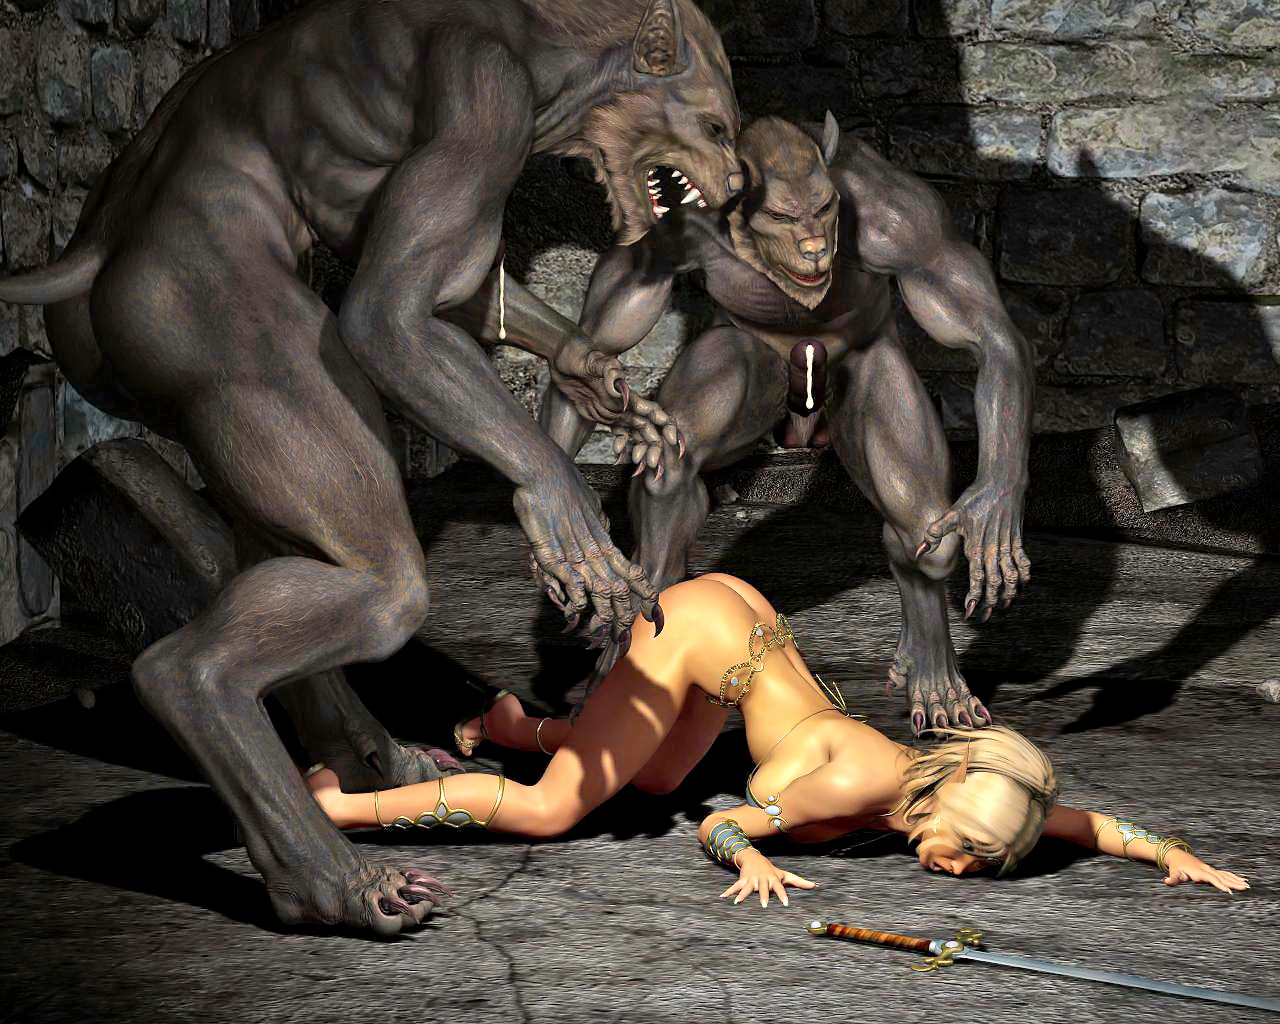 Scary Monster Anal - Brutally buttfucked by werewolves â€“ 3D RPG animation anal sex at  Hd3dMonsterSex.com